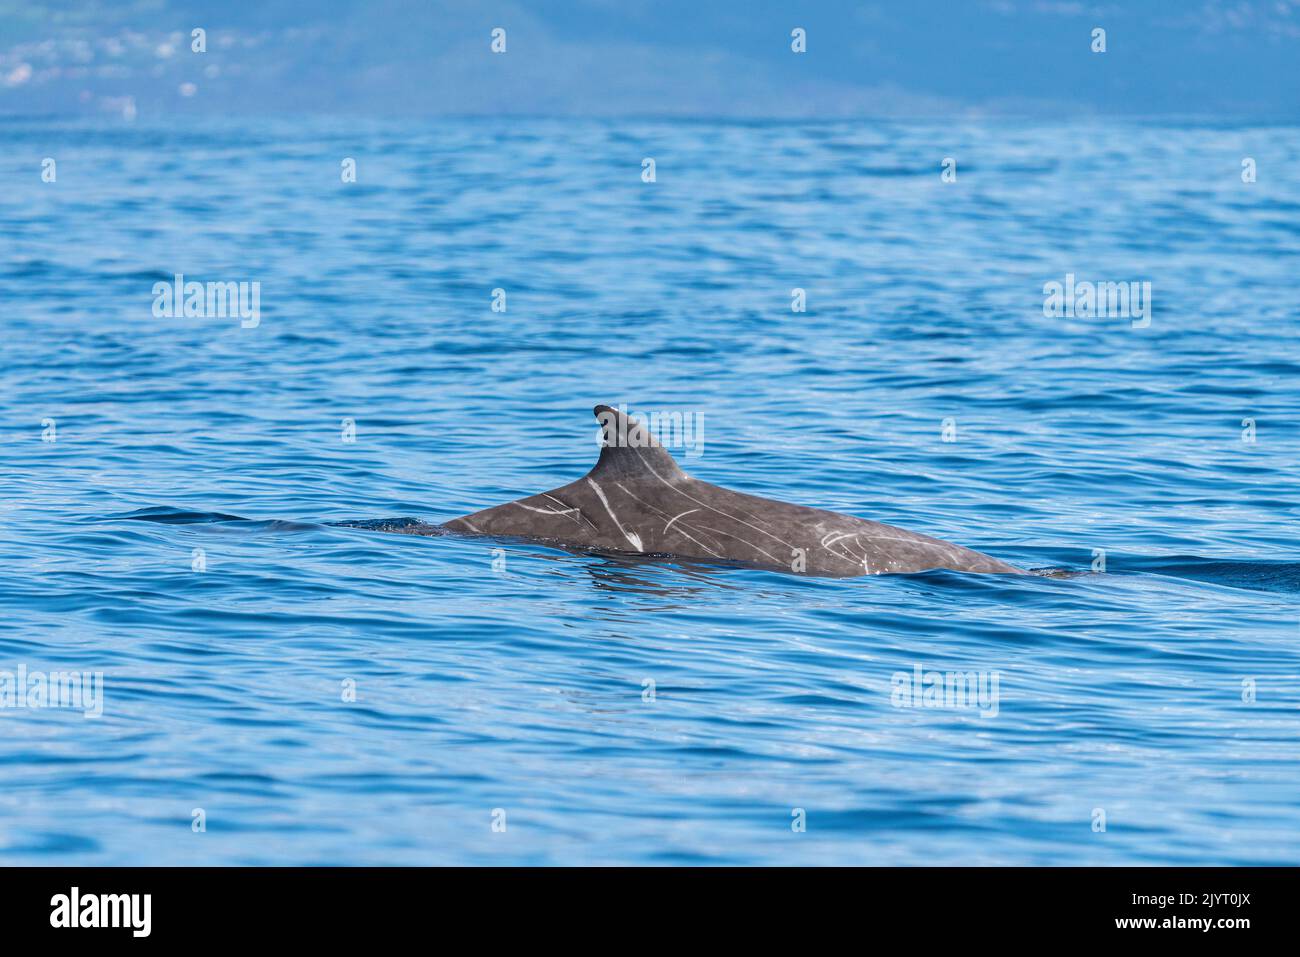 Cuvier's beaked whale or goose-beaked whale (Ziphius cavirostris) dorsal fin surfacing. Azores, Portugal, Atlantic Ocean. Stock Photo